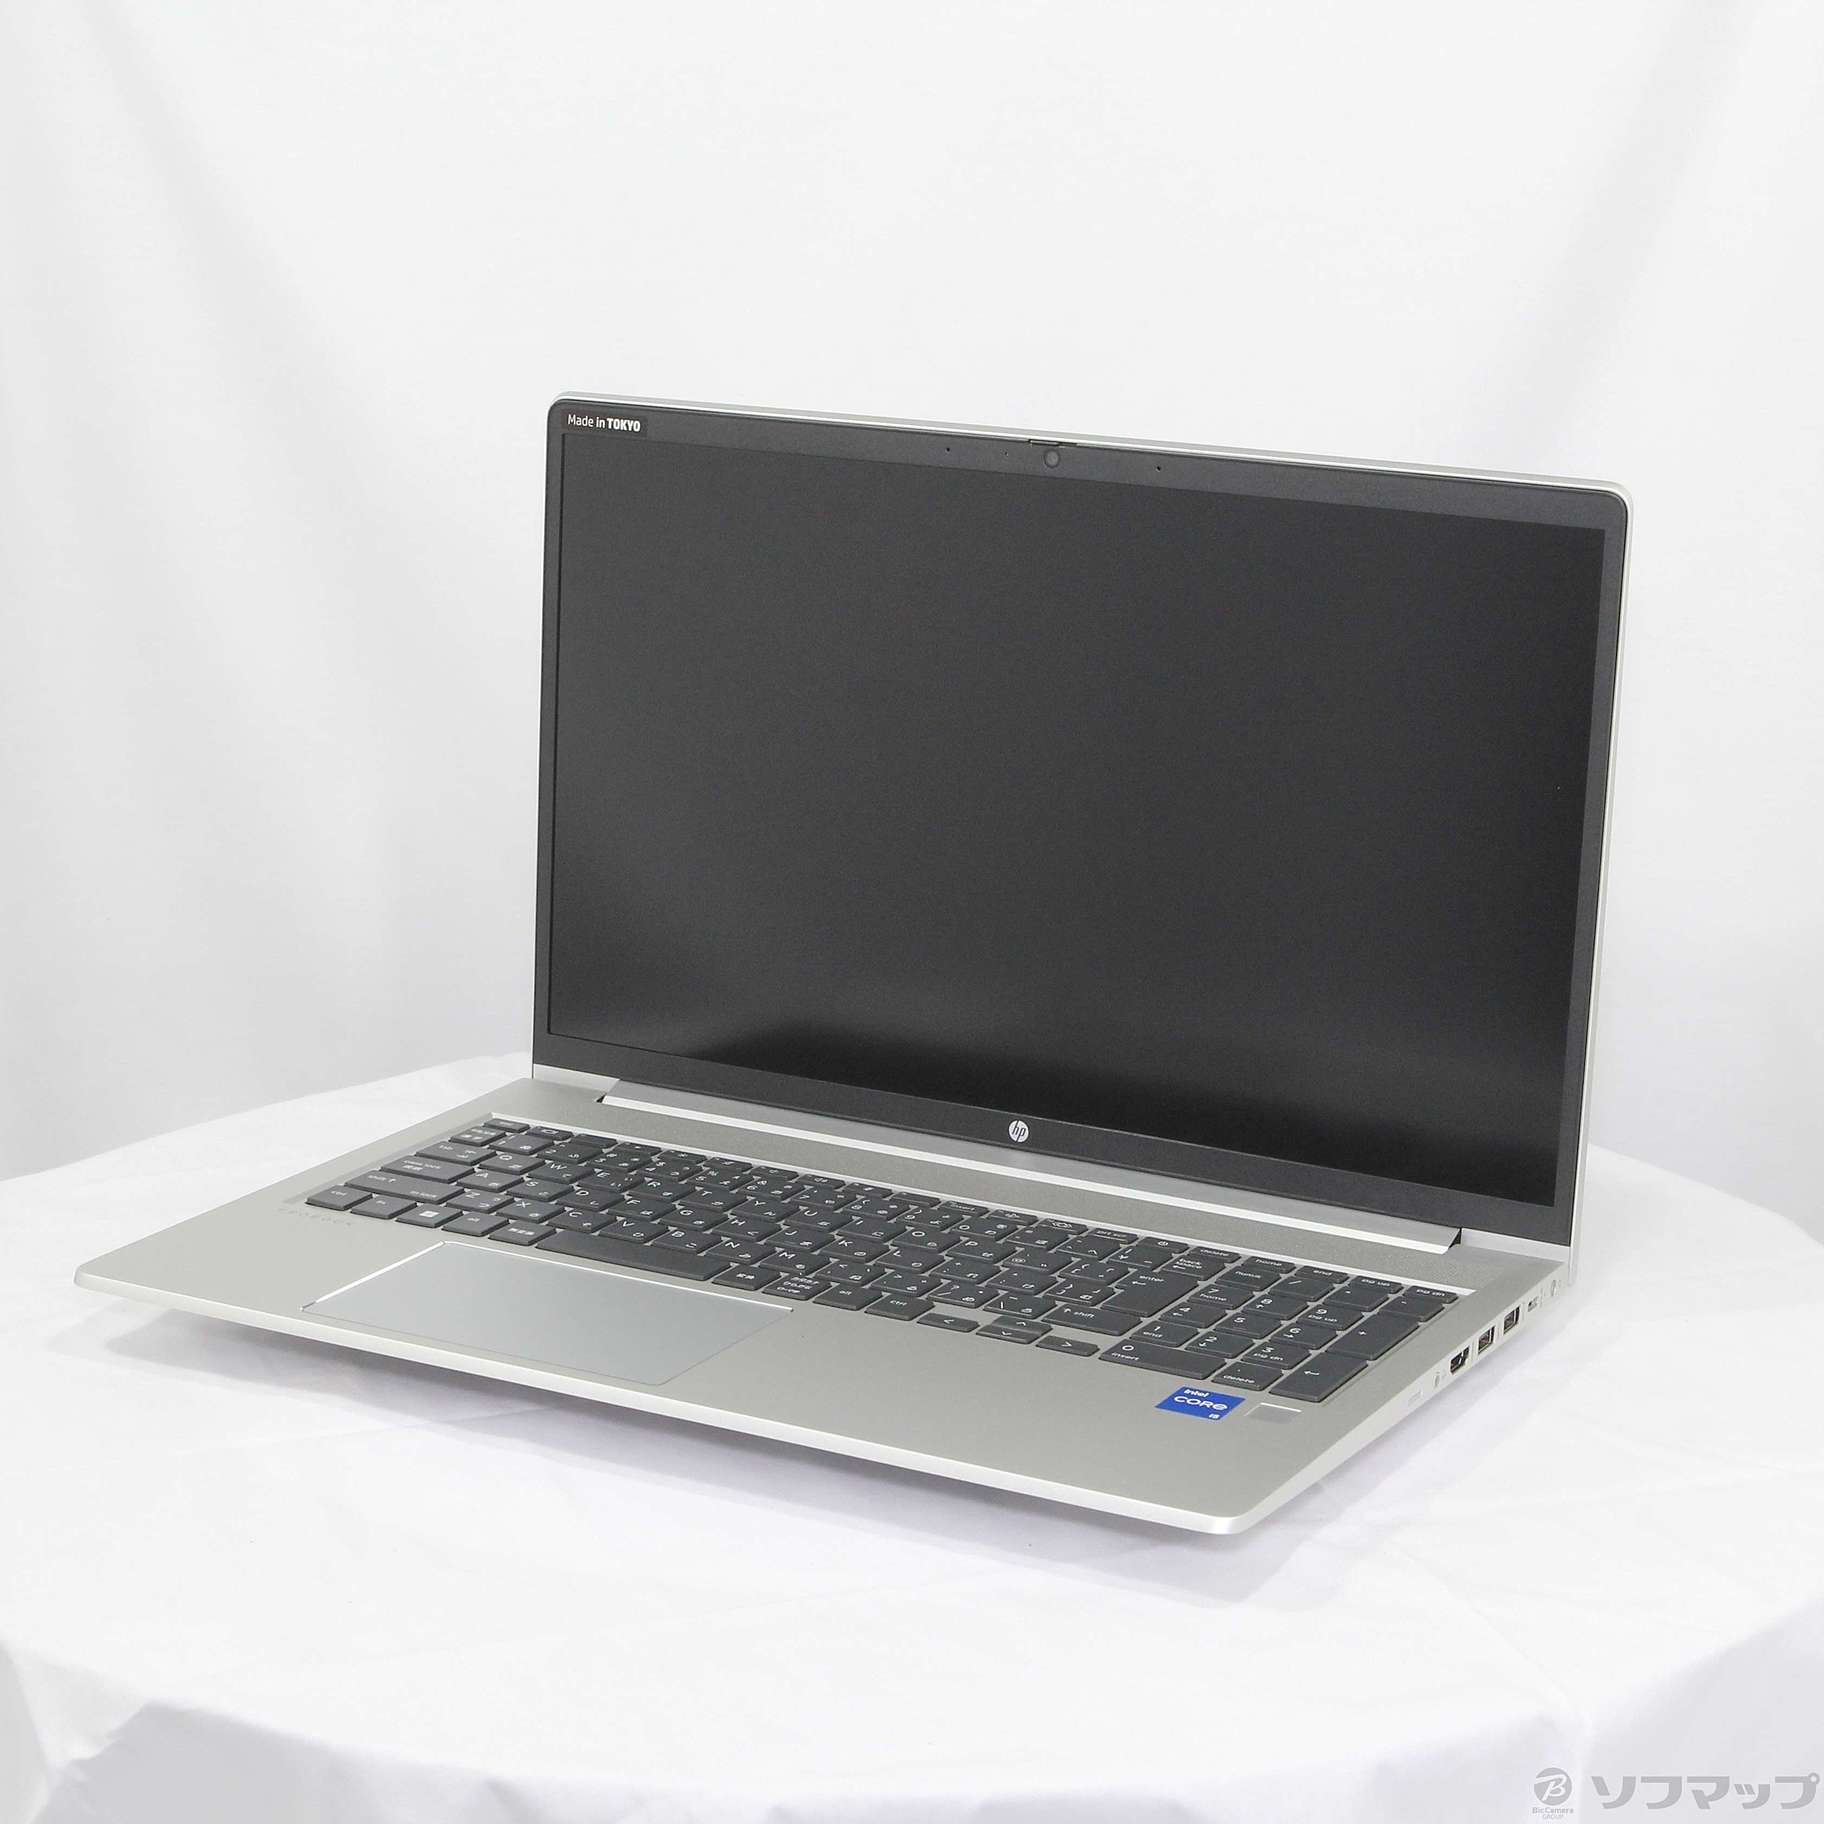 HP ProBook 450 G8 Notebook PC 2021年版 (15.6インチ) のぞき見防止 液晶保護フィルム キズ防止 ディスプレイ保護